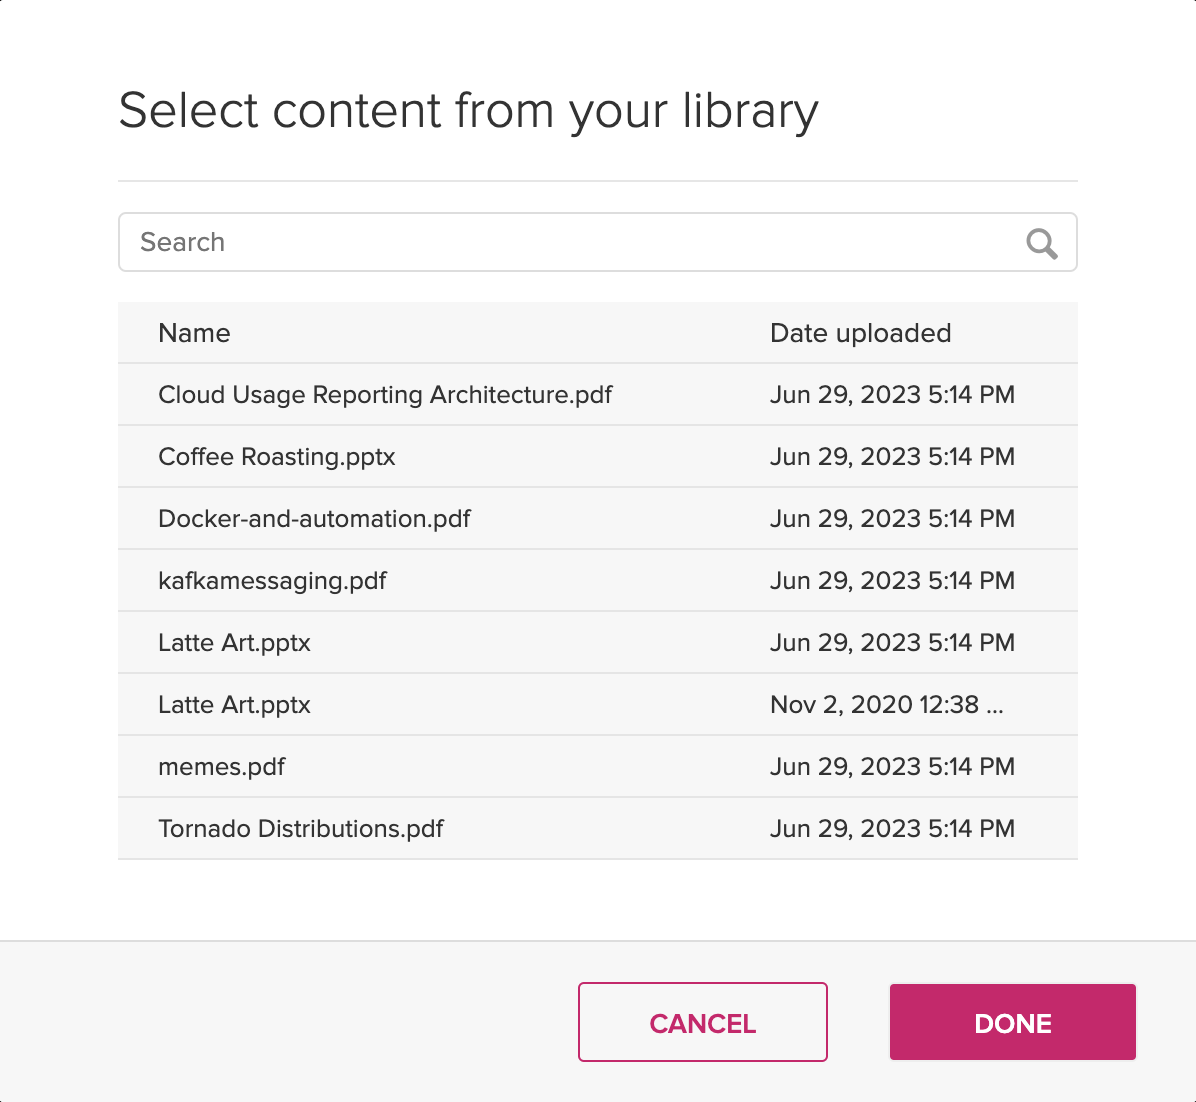 Select content from library dialog box showing list of presentation media available with one selected and Done button active for steps as described